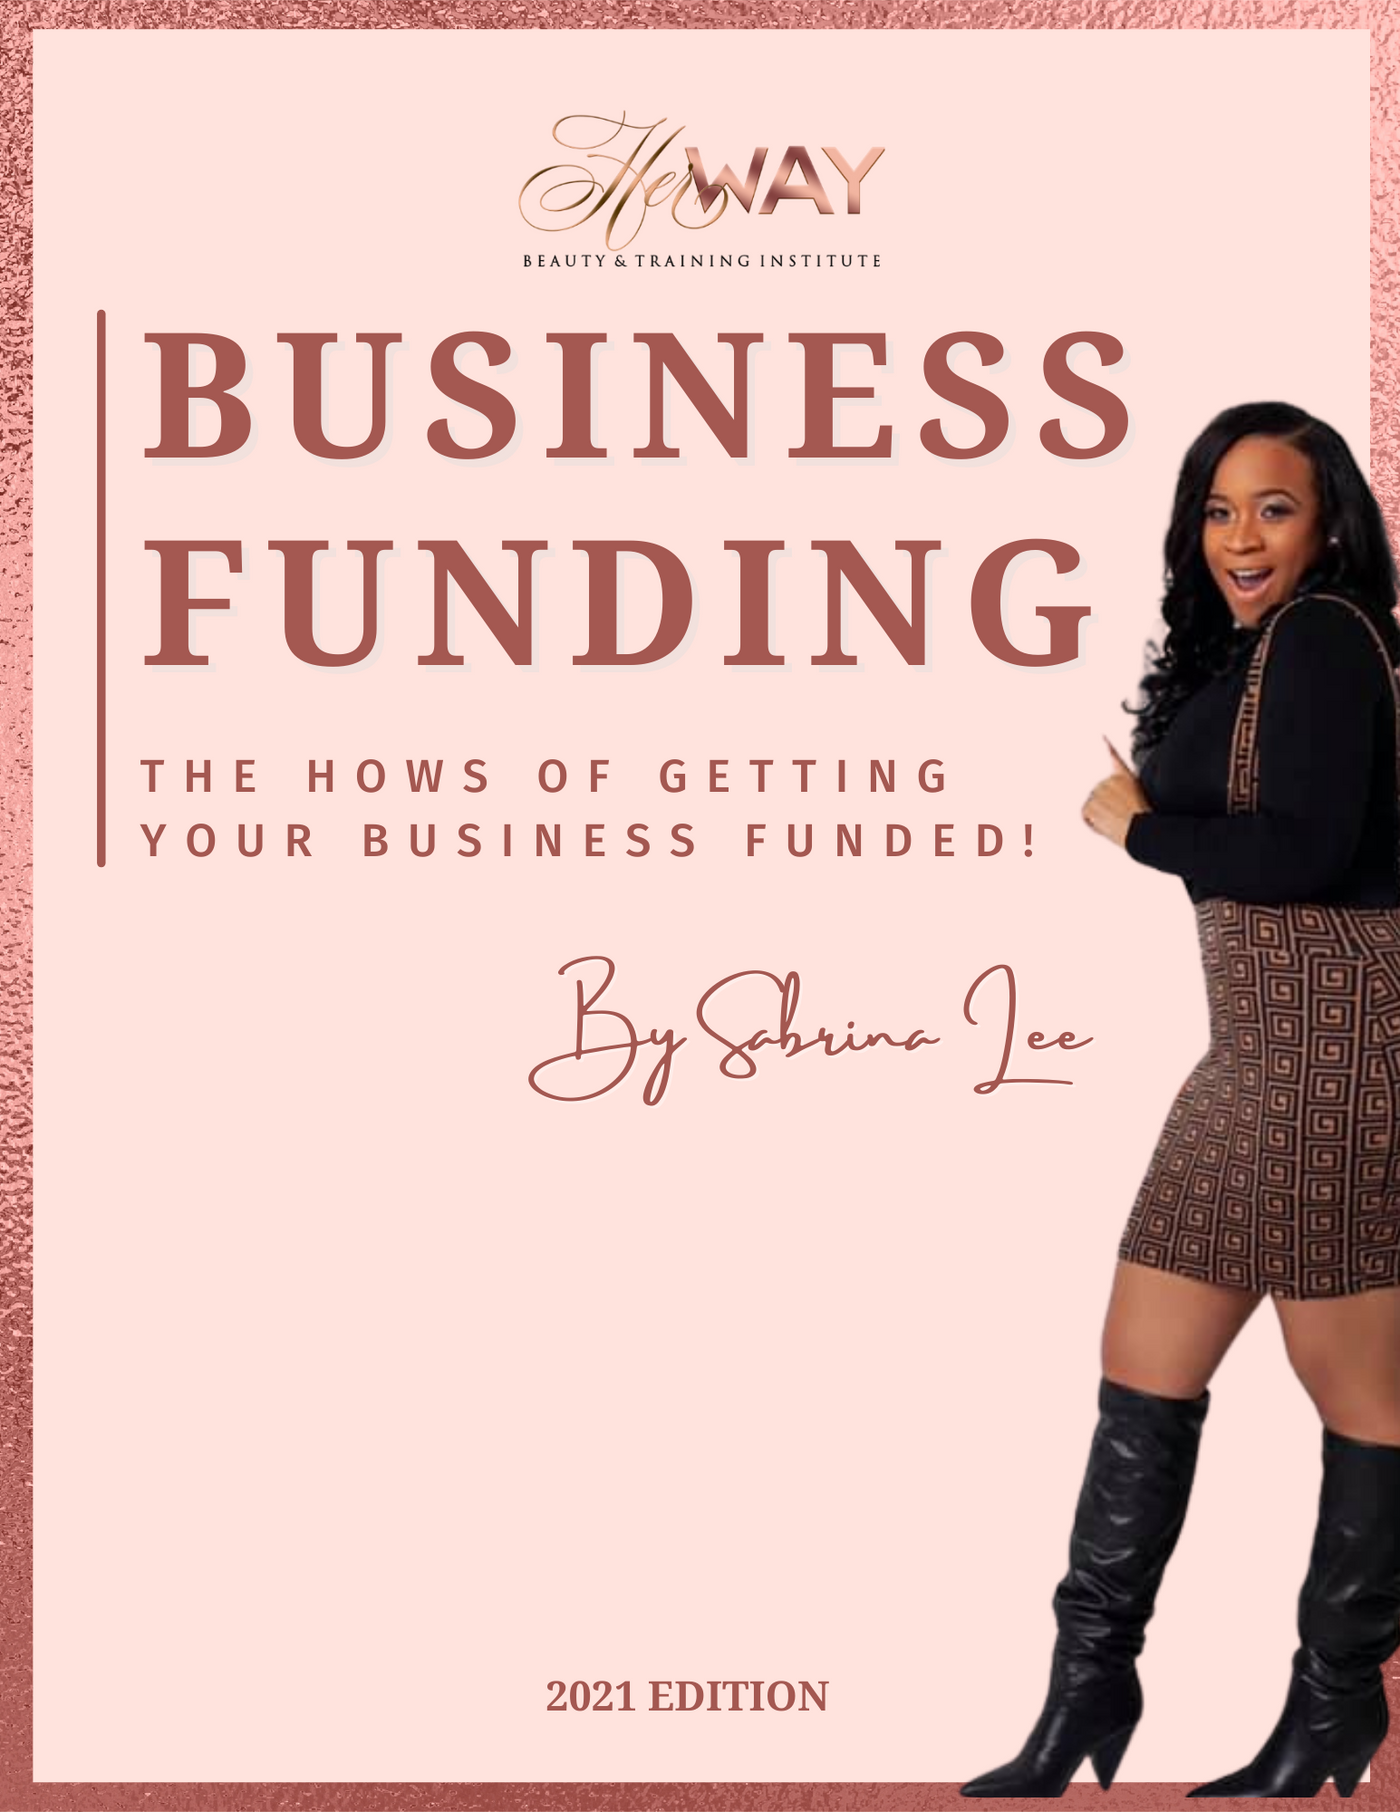 Business Funding - The Hows of Getting Your Business Funded